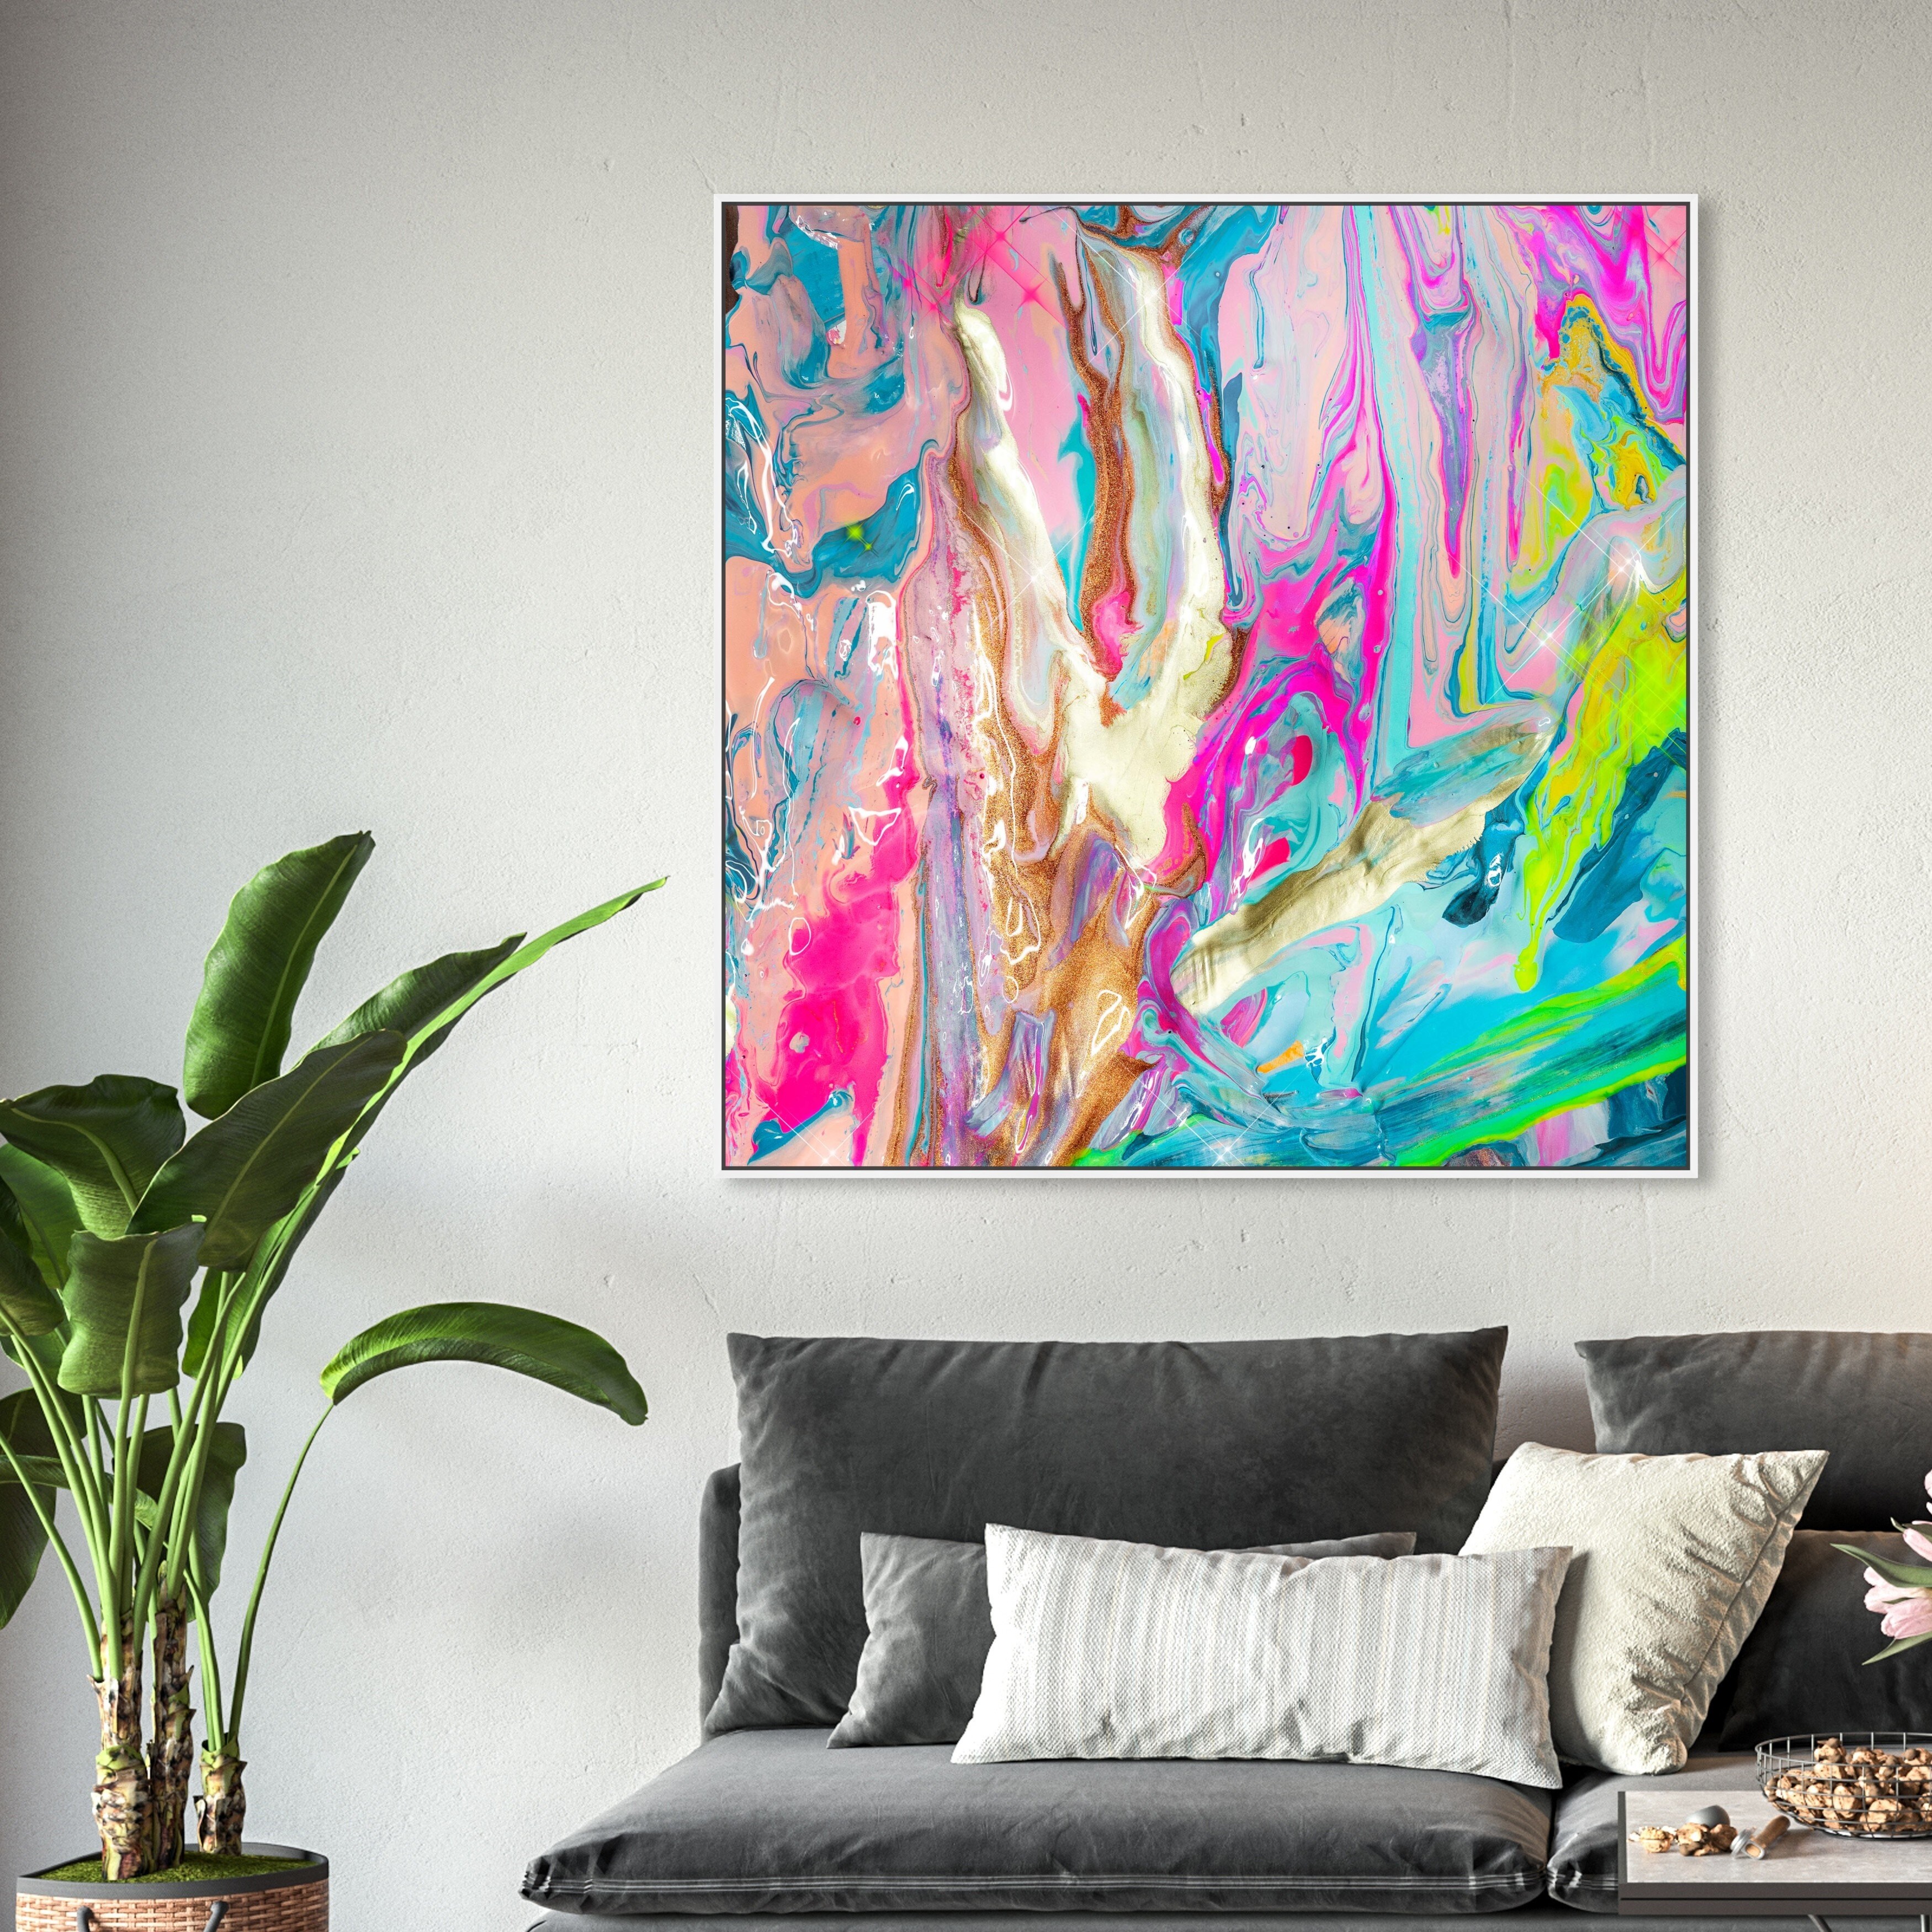 Oliver Gal 'Neon Party' Abstract Wall Art Framed Canvas Print Paint - Pink, Blue